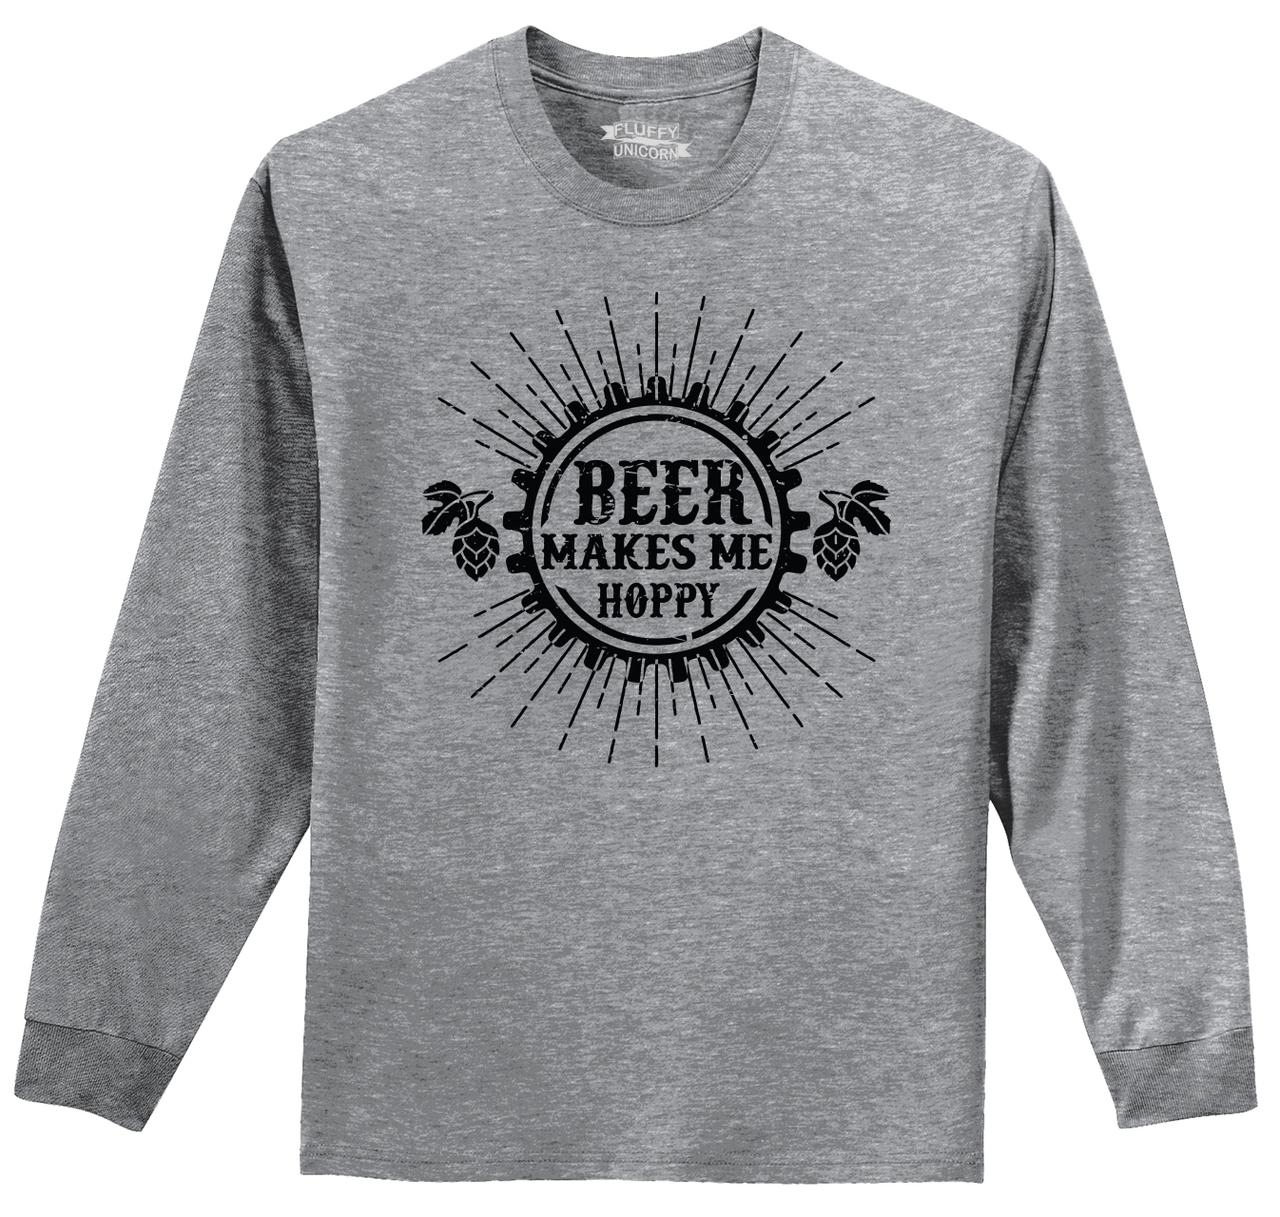 Beer Makes Me Hoppy Funny T Shirt Alcohol Brewery Beer Tee Shirt Z1 | eBay